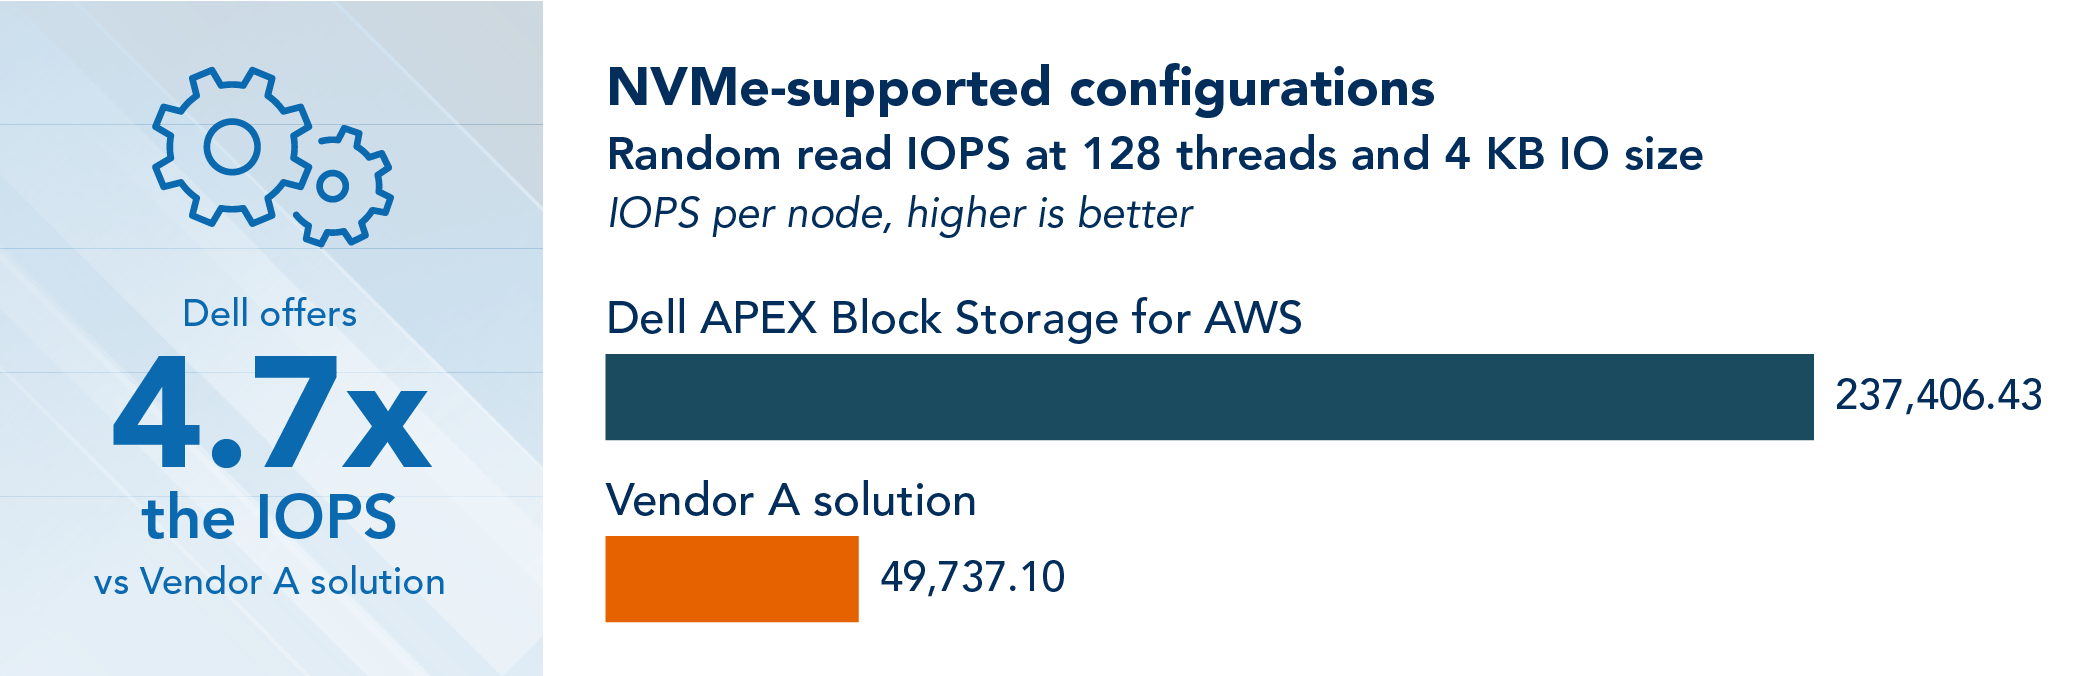 Comparison of random read IOPS at 128 threads and 4 KB I/O size for Dell APEX Block Storage for AWS and the Vendor A solution in their NVMe-supported configurations, where higher is better. Dell APEX Block Storage for AWS achieved 237,406.43 IOPS per node, and the Vendor A solution achieved 49,737.1 IOPS per node. Dell offers 4.7x the IOPS vs. Vendor A solution.